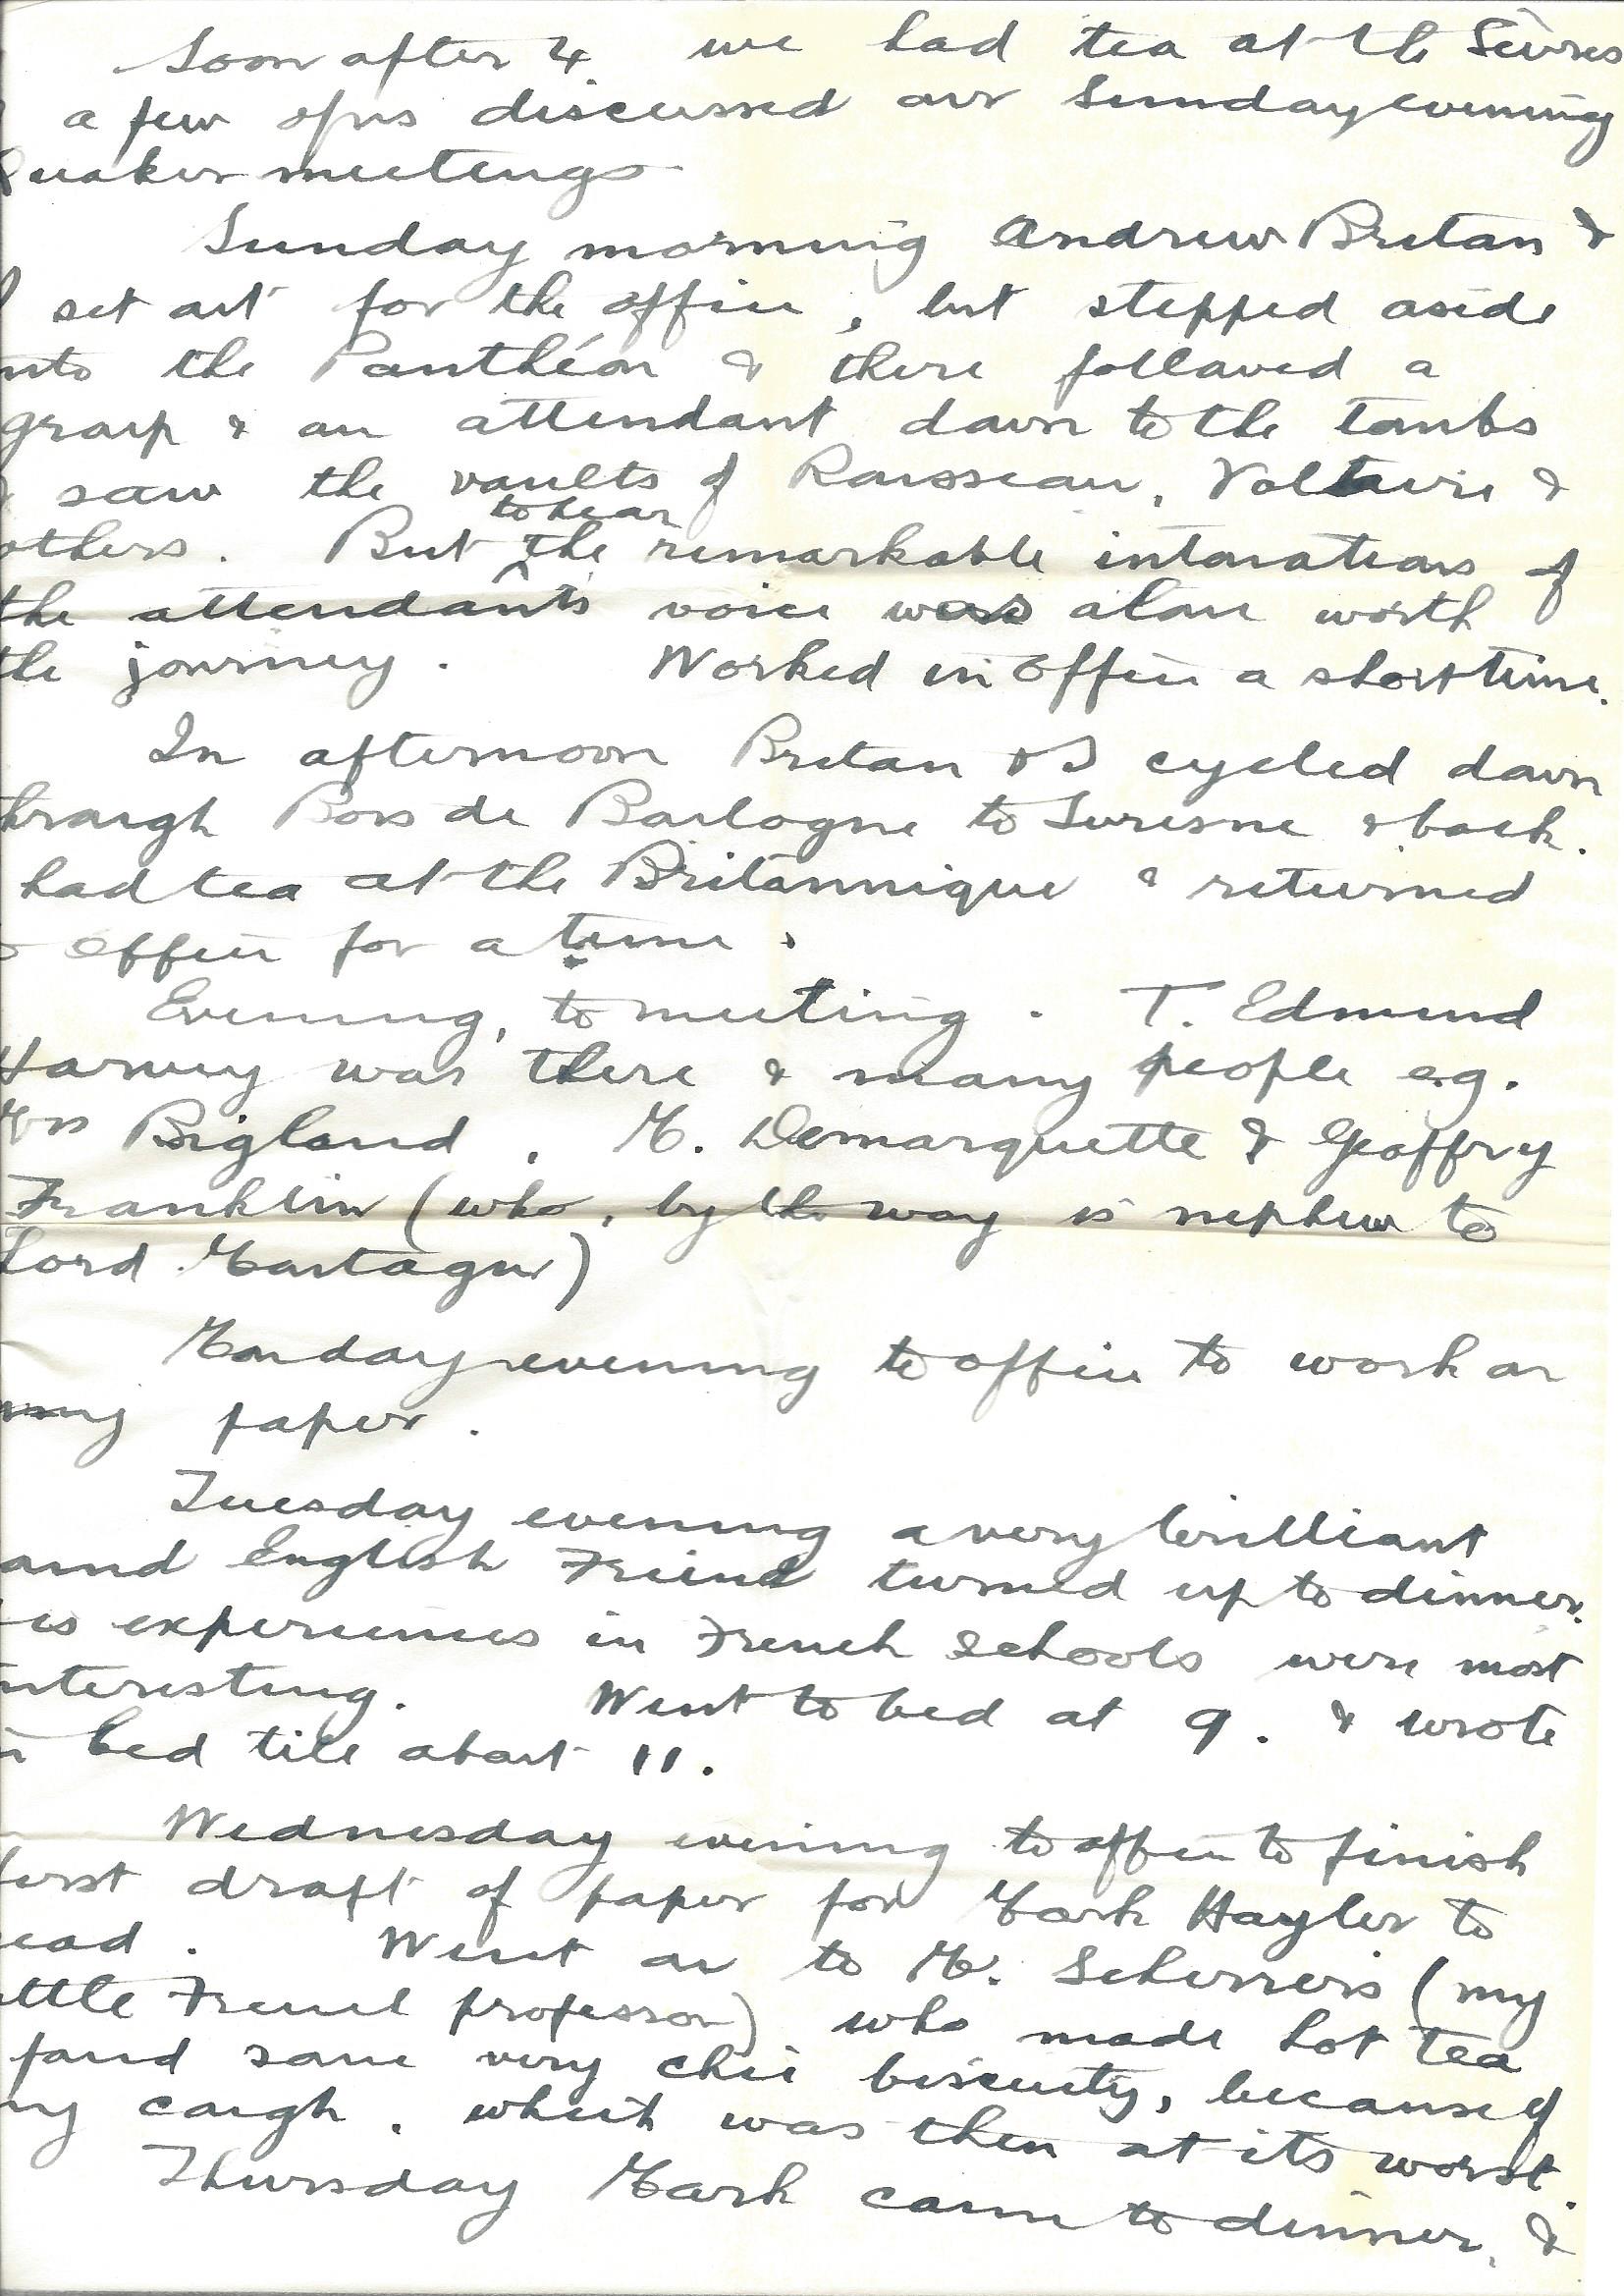 1920-02-08 page 3 letter by Donald Bearman